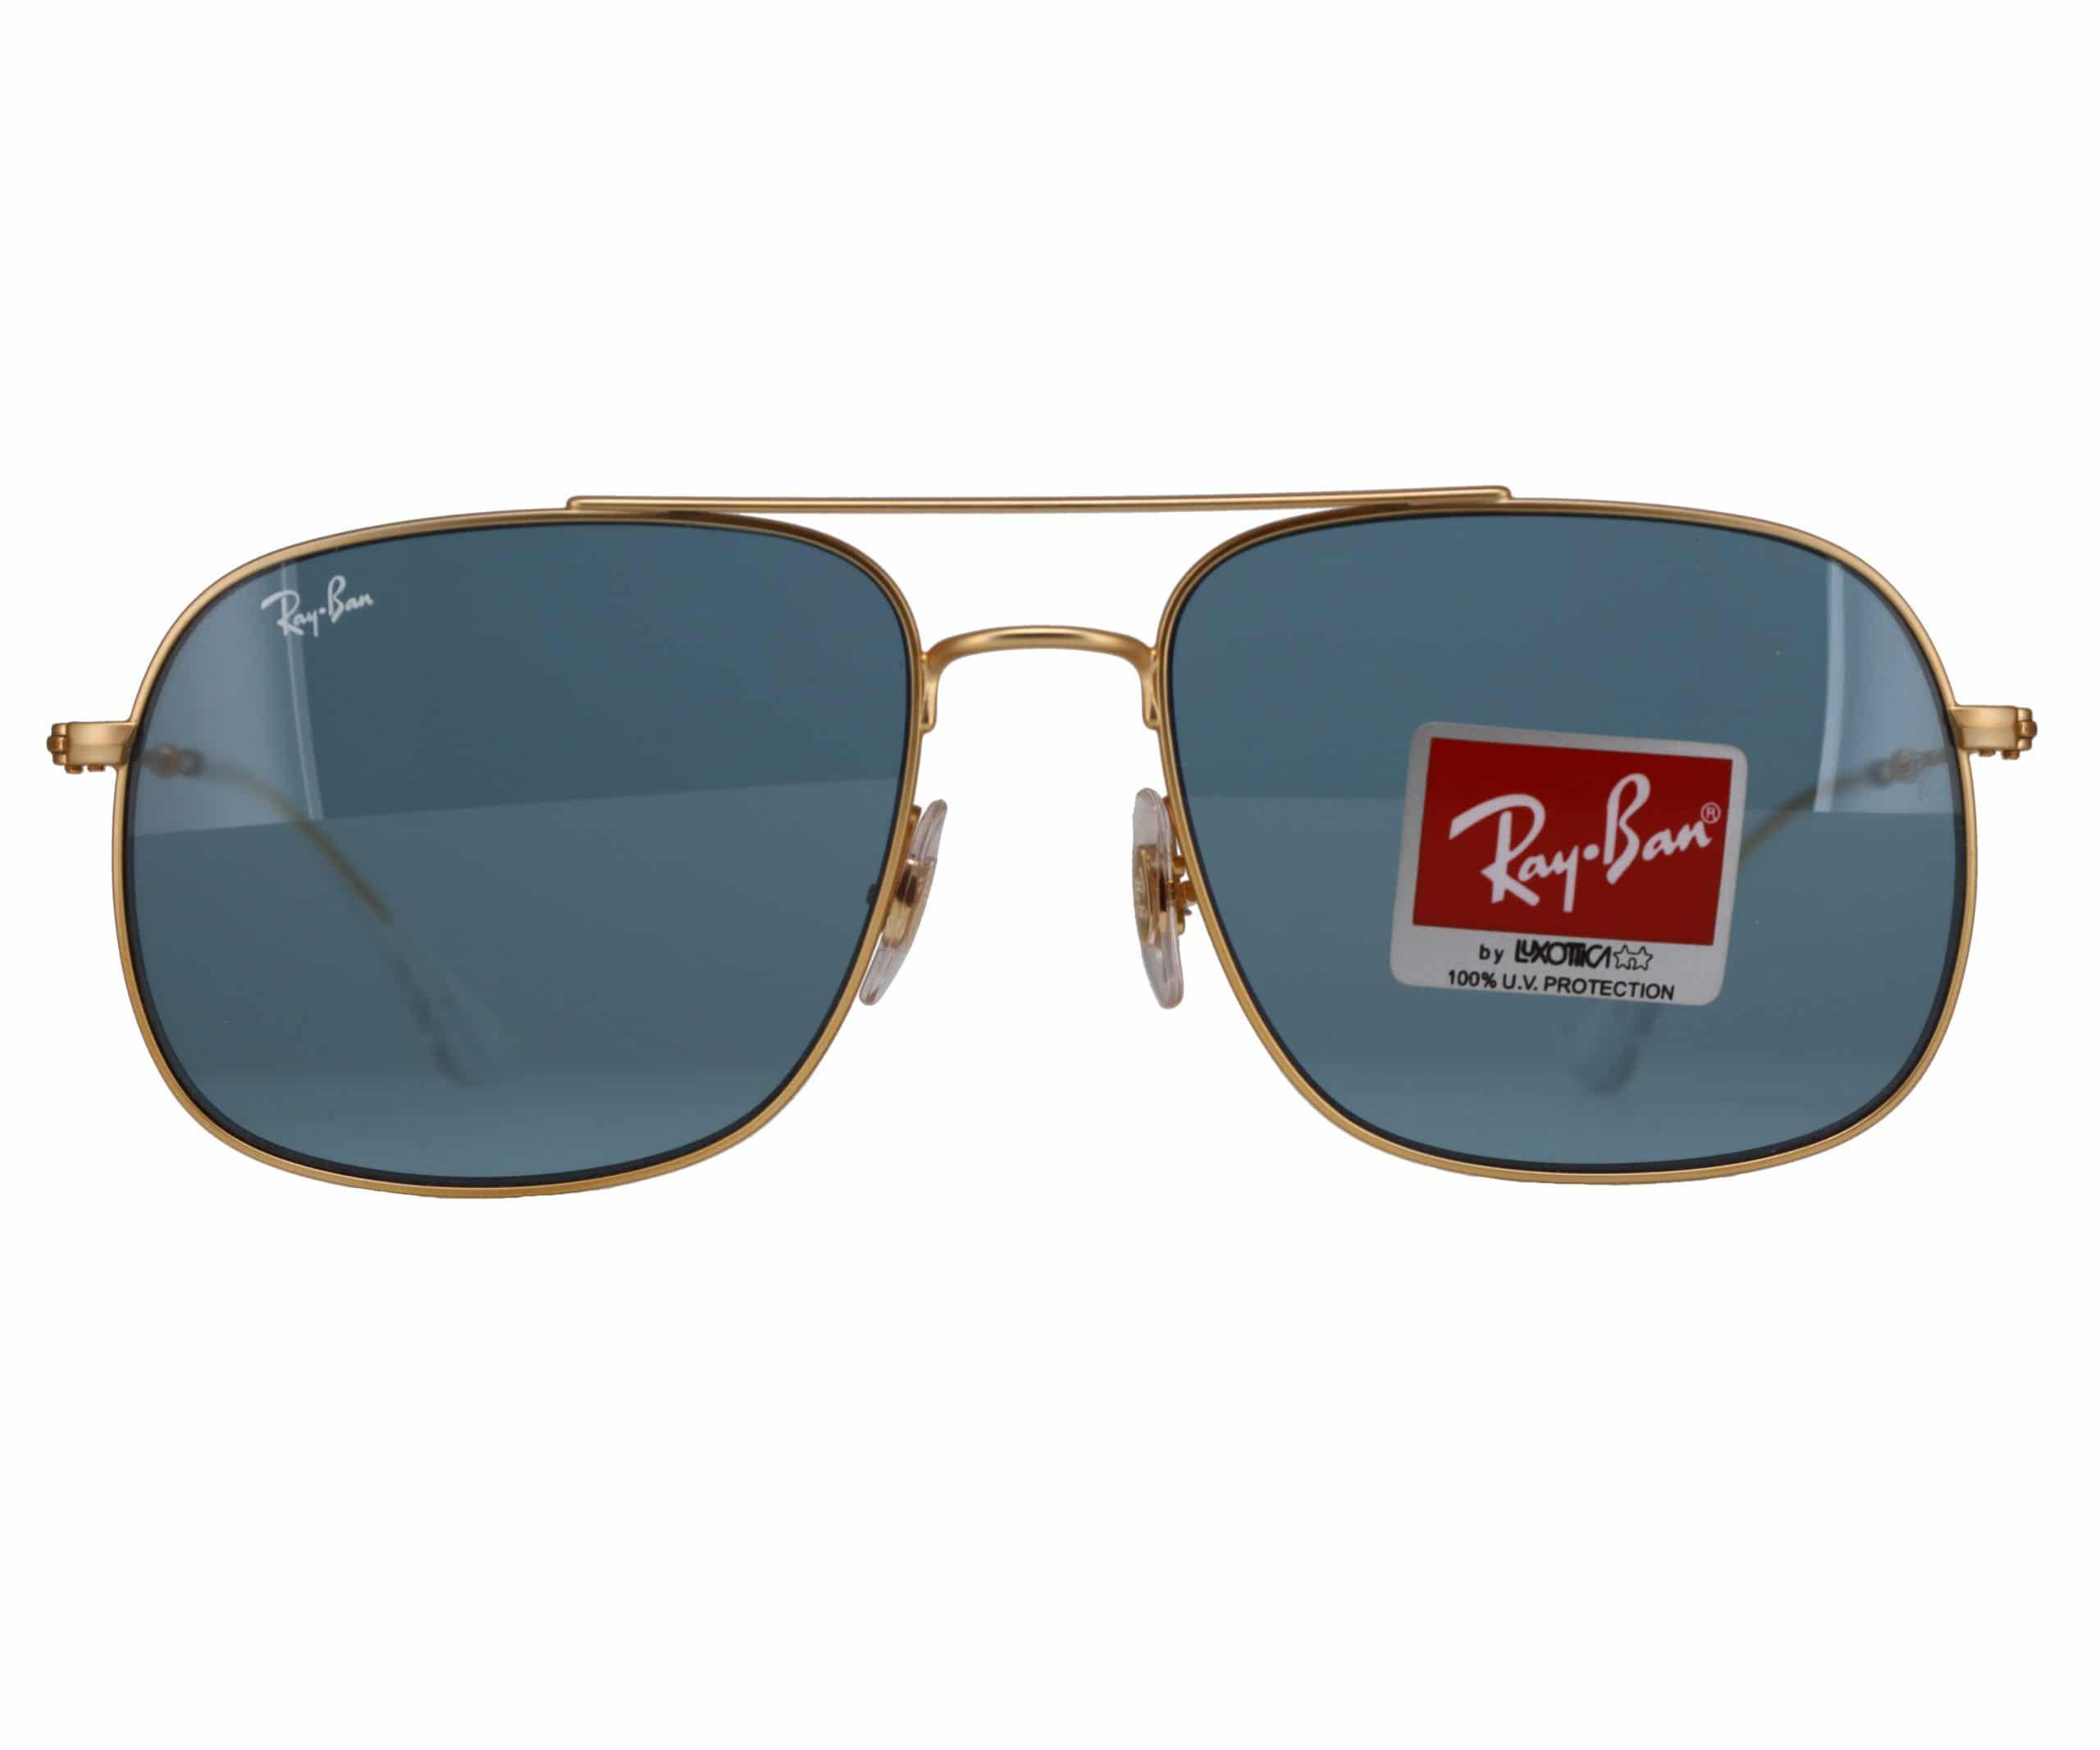 Authentic Ray-Ban Sunglasses RB3595 9013/80 - Vision 770